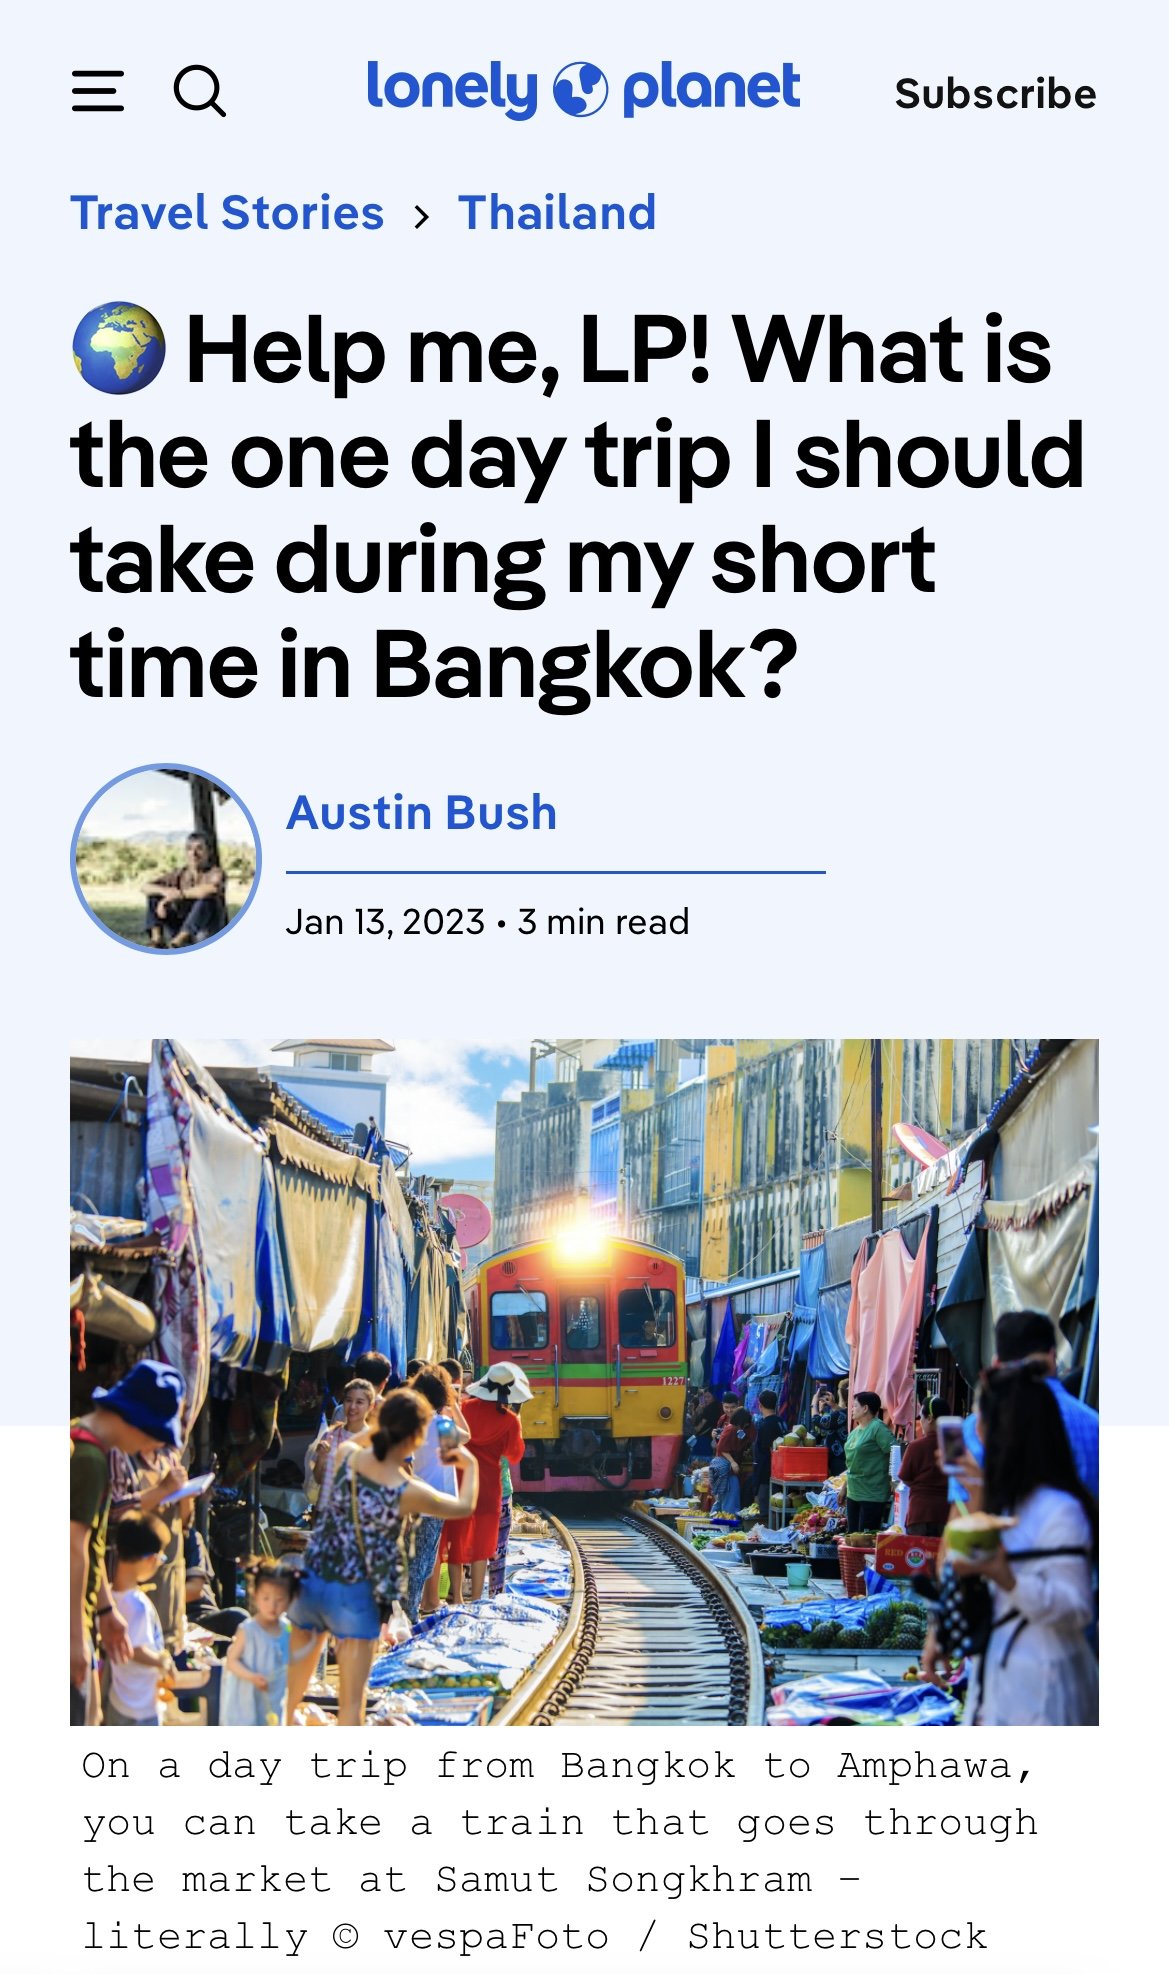  Text: “ Help me, LP! What is the one day trip I should take during my short time in Bangkok ?” Lonely Planet 